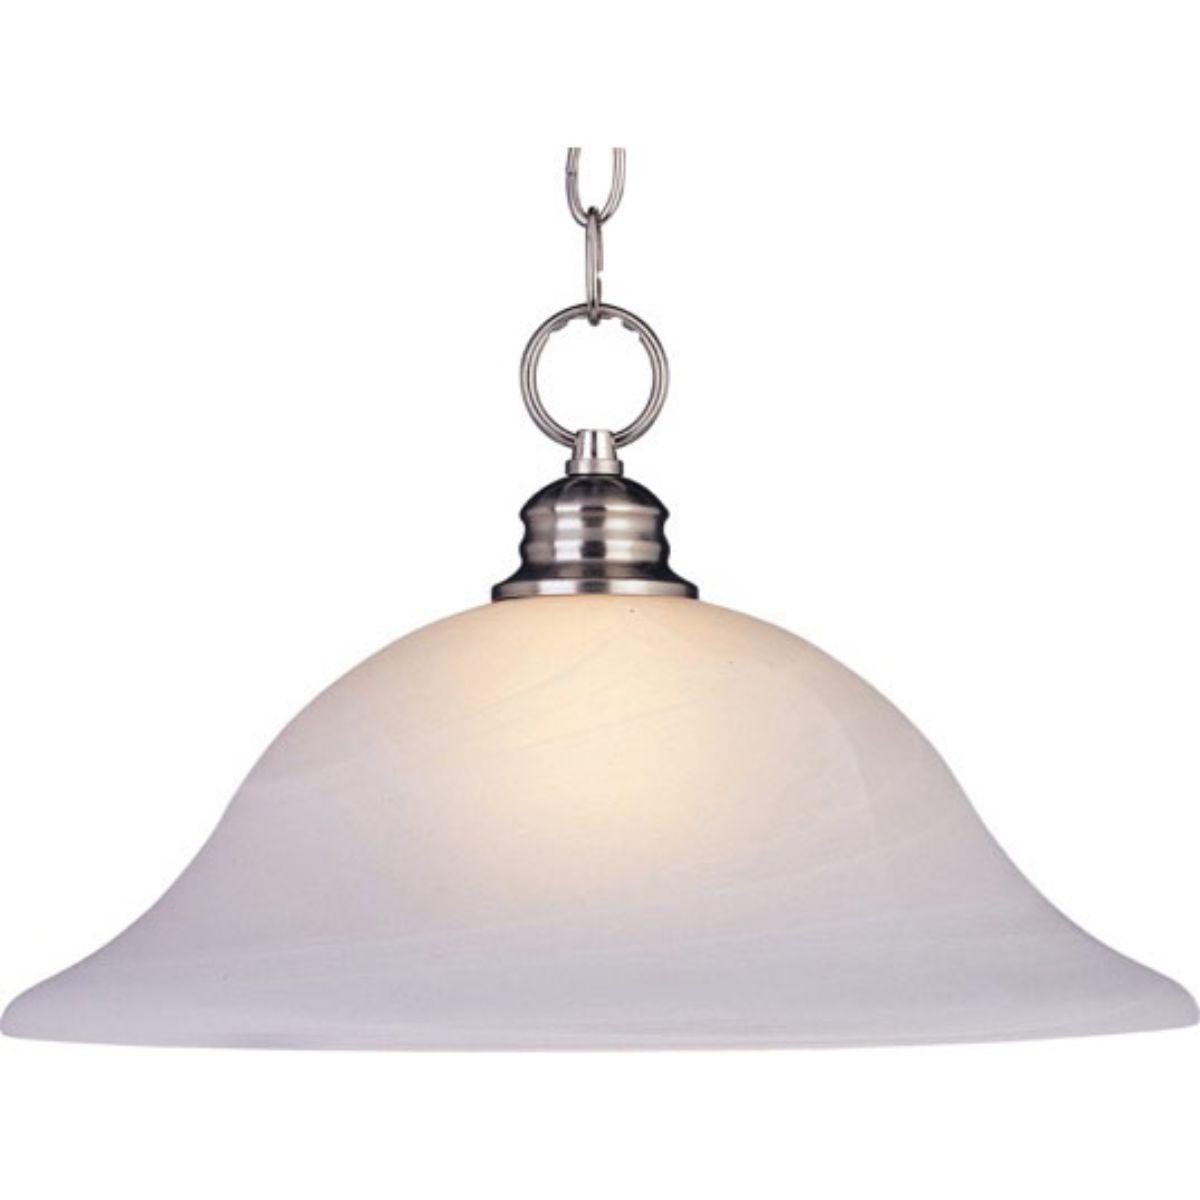 Essentials-9106x 16 in. Pendant Light with Marble Glass - Bees Lighting